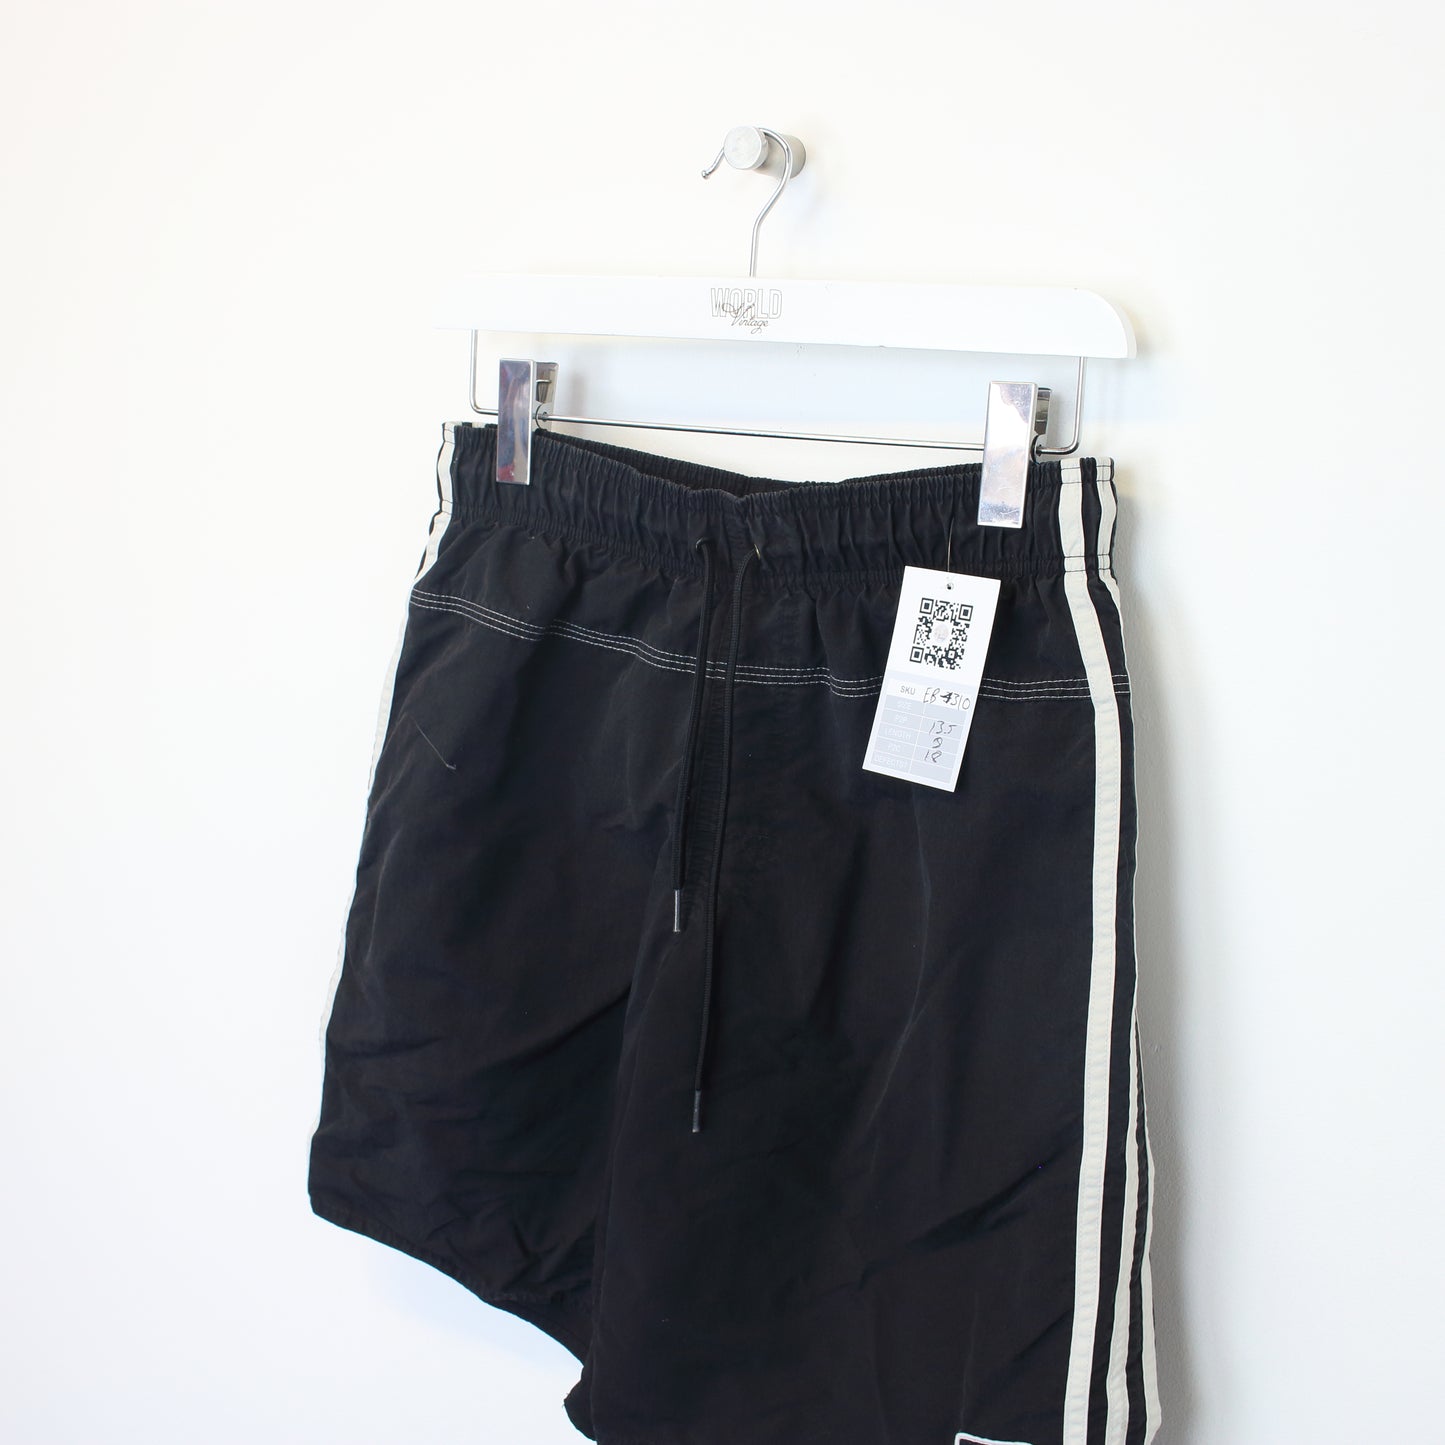 Vintage Adidas shorts in black and white . Best fits S